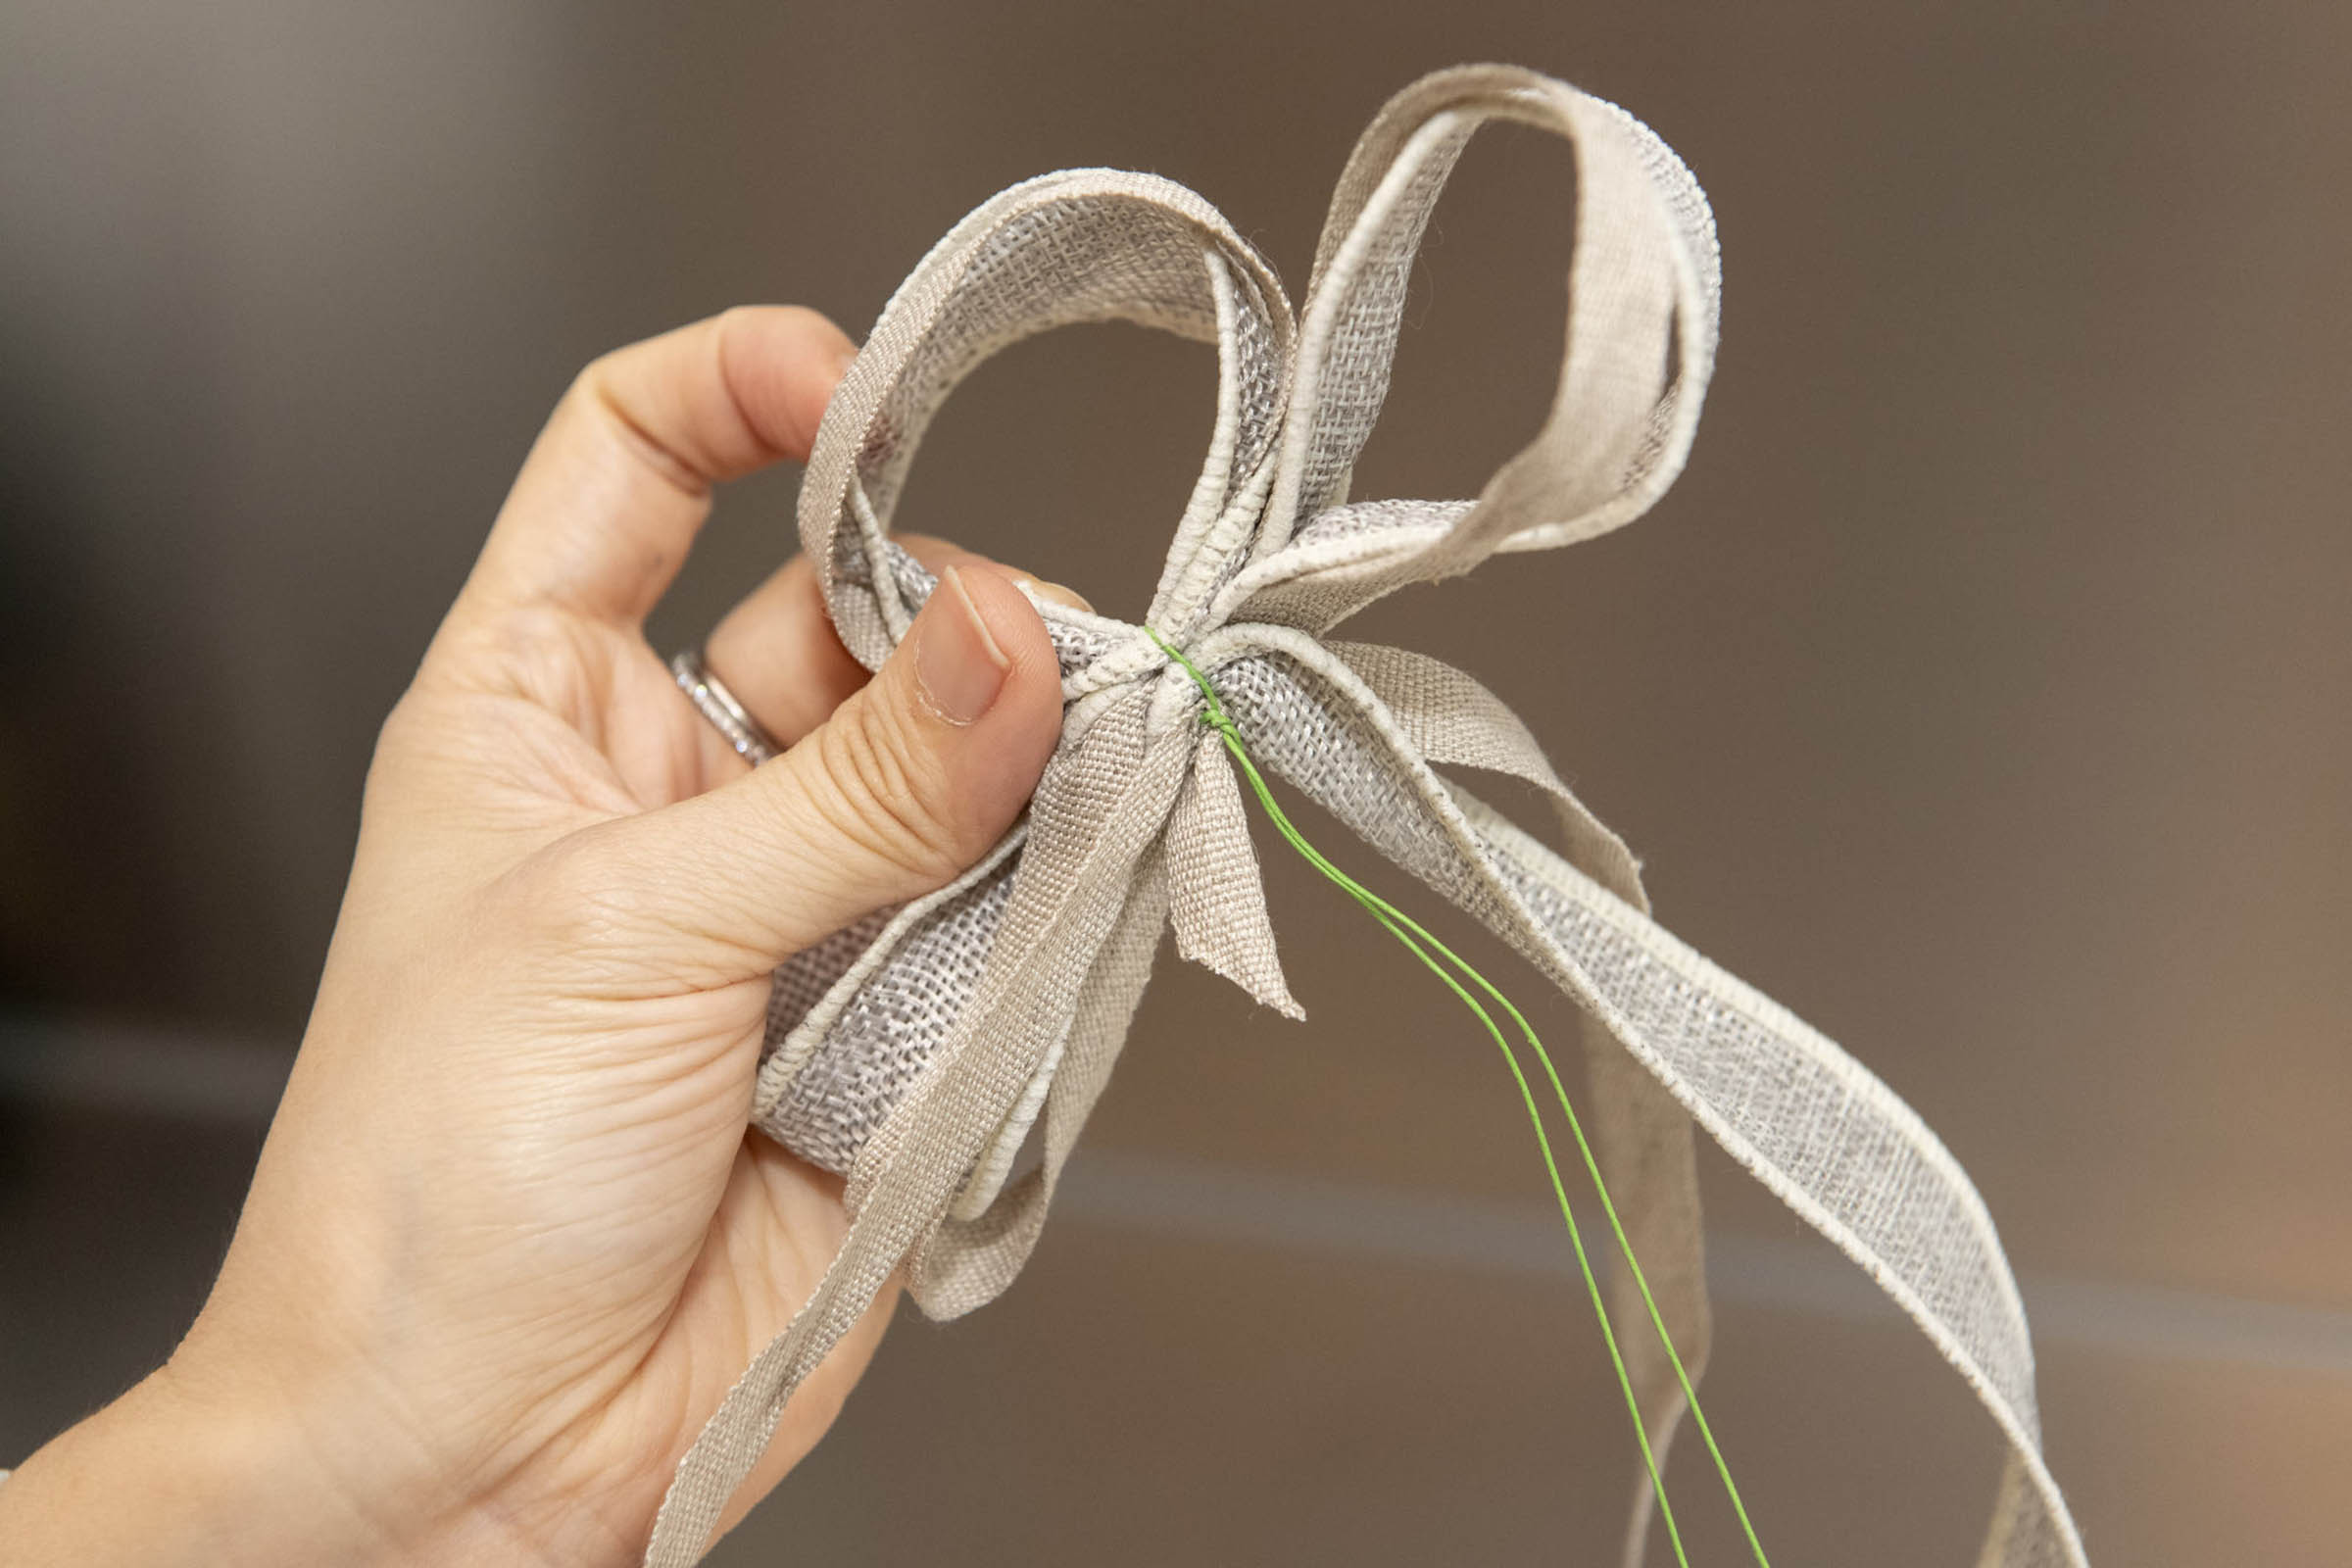 How to make a ribbon bow? Follow these easy steps!